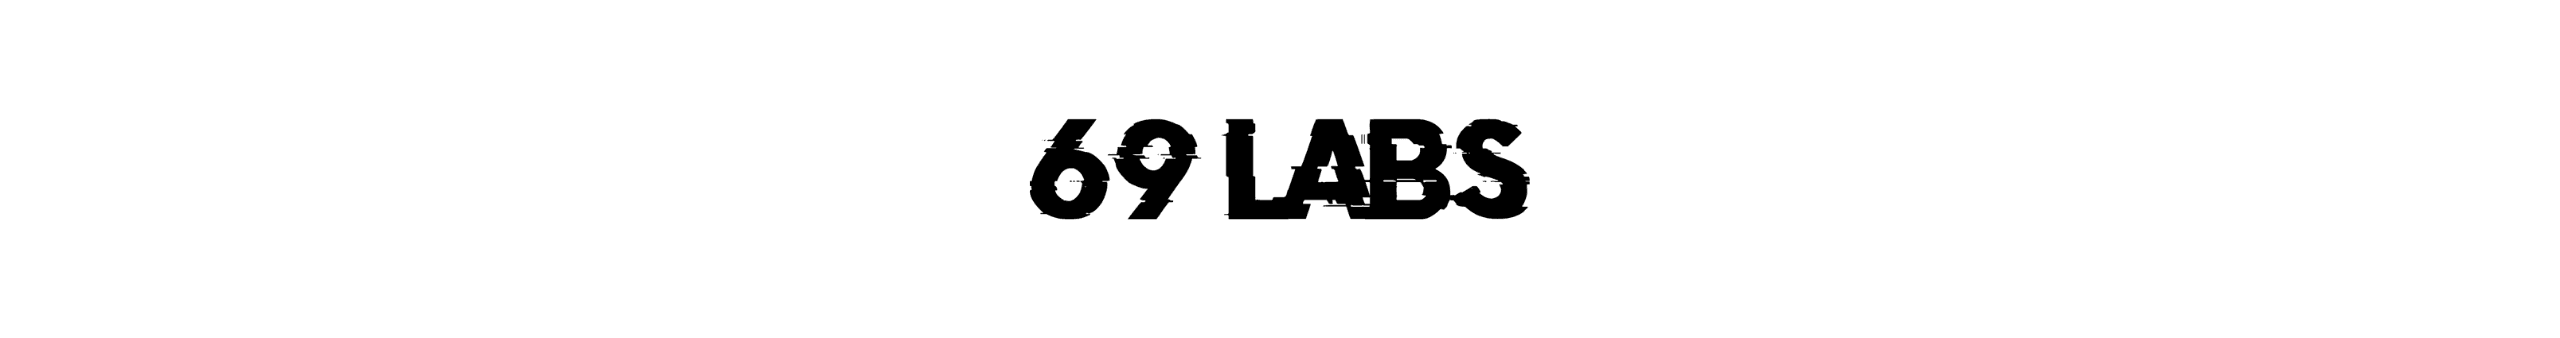 69Labs banner